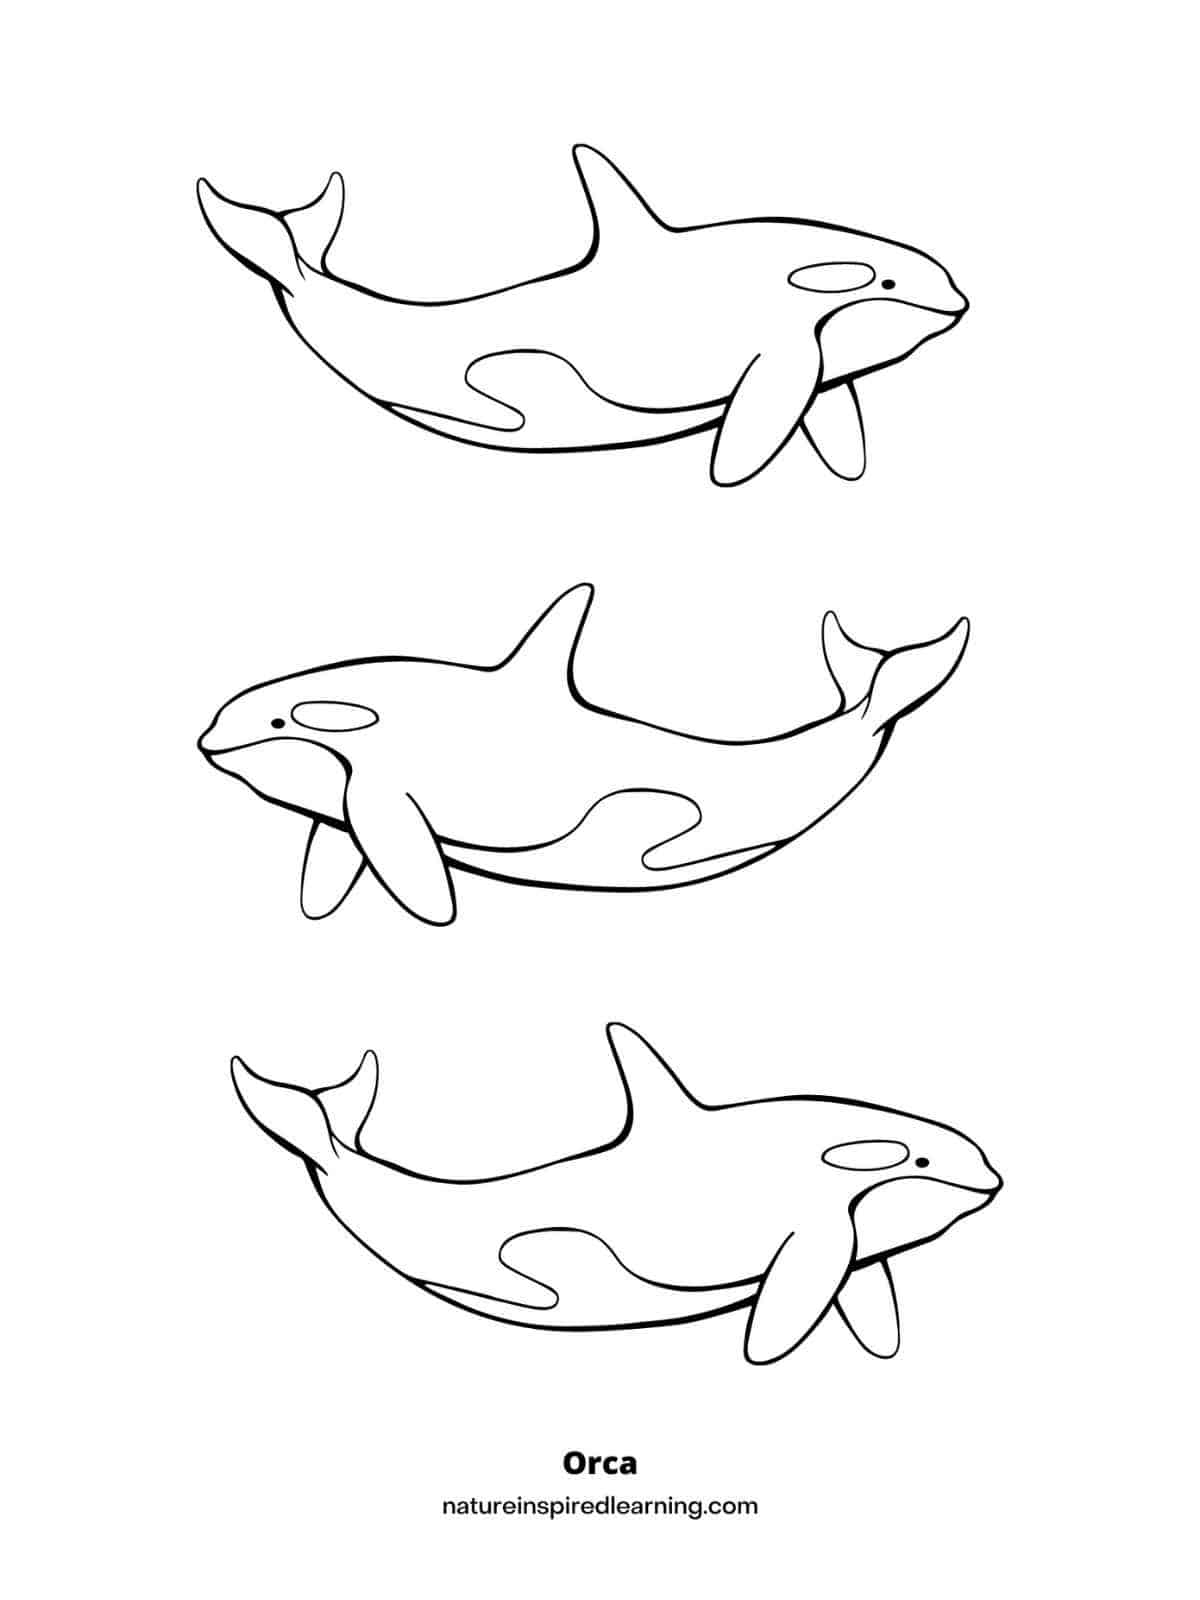 black and white coloring sheet with three orcas arranged in rows facing opposite directions